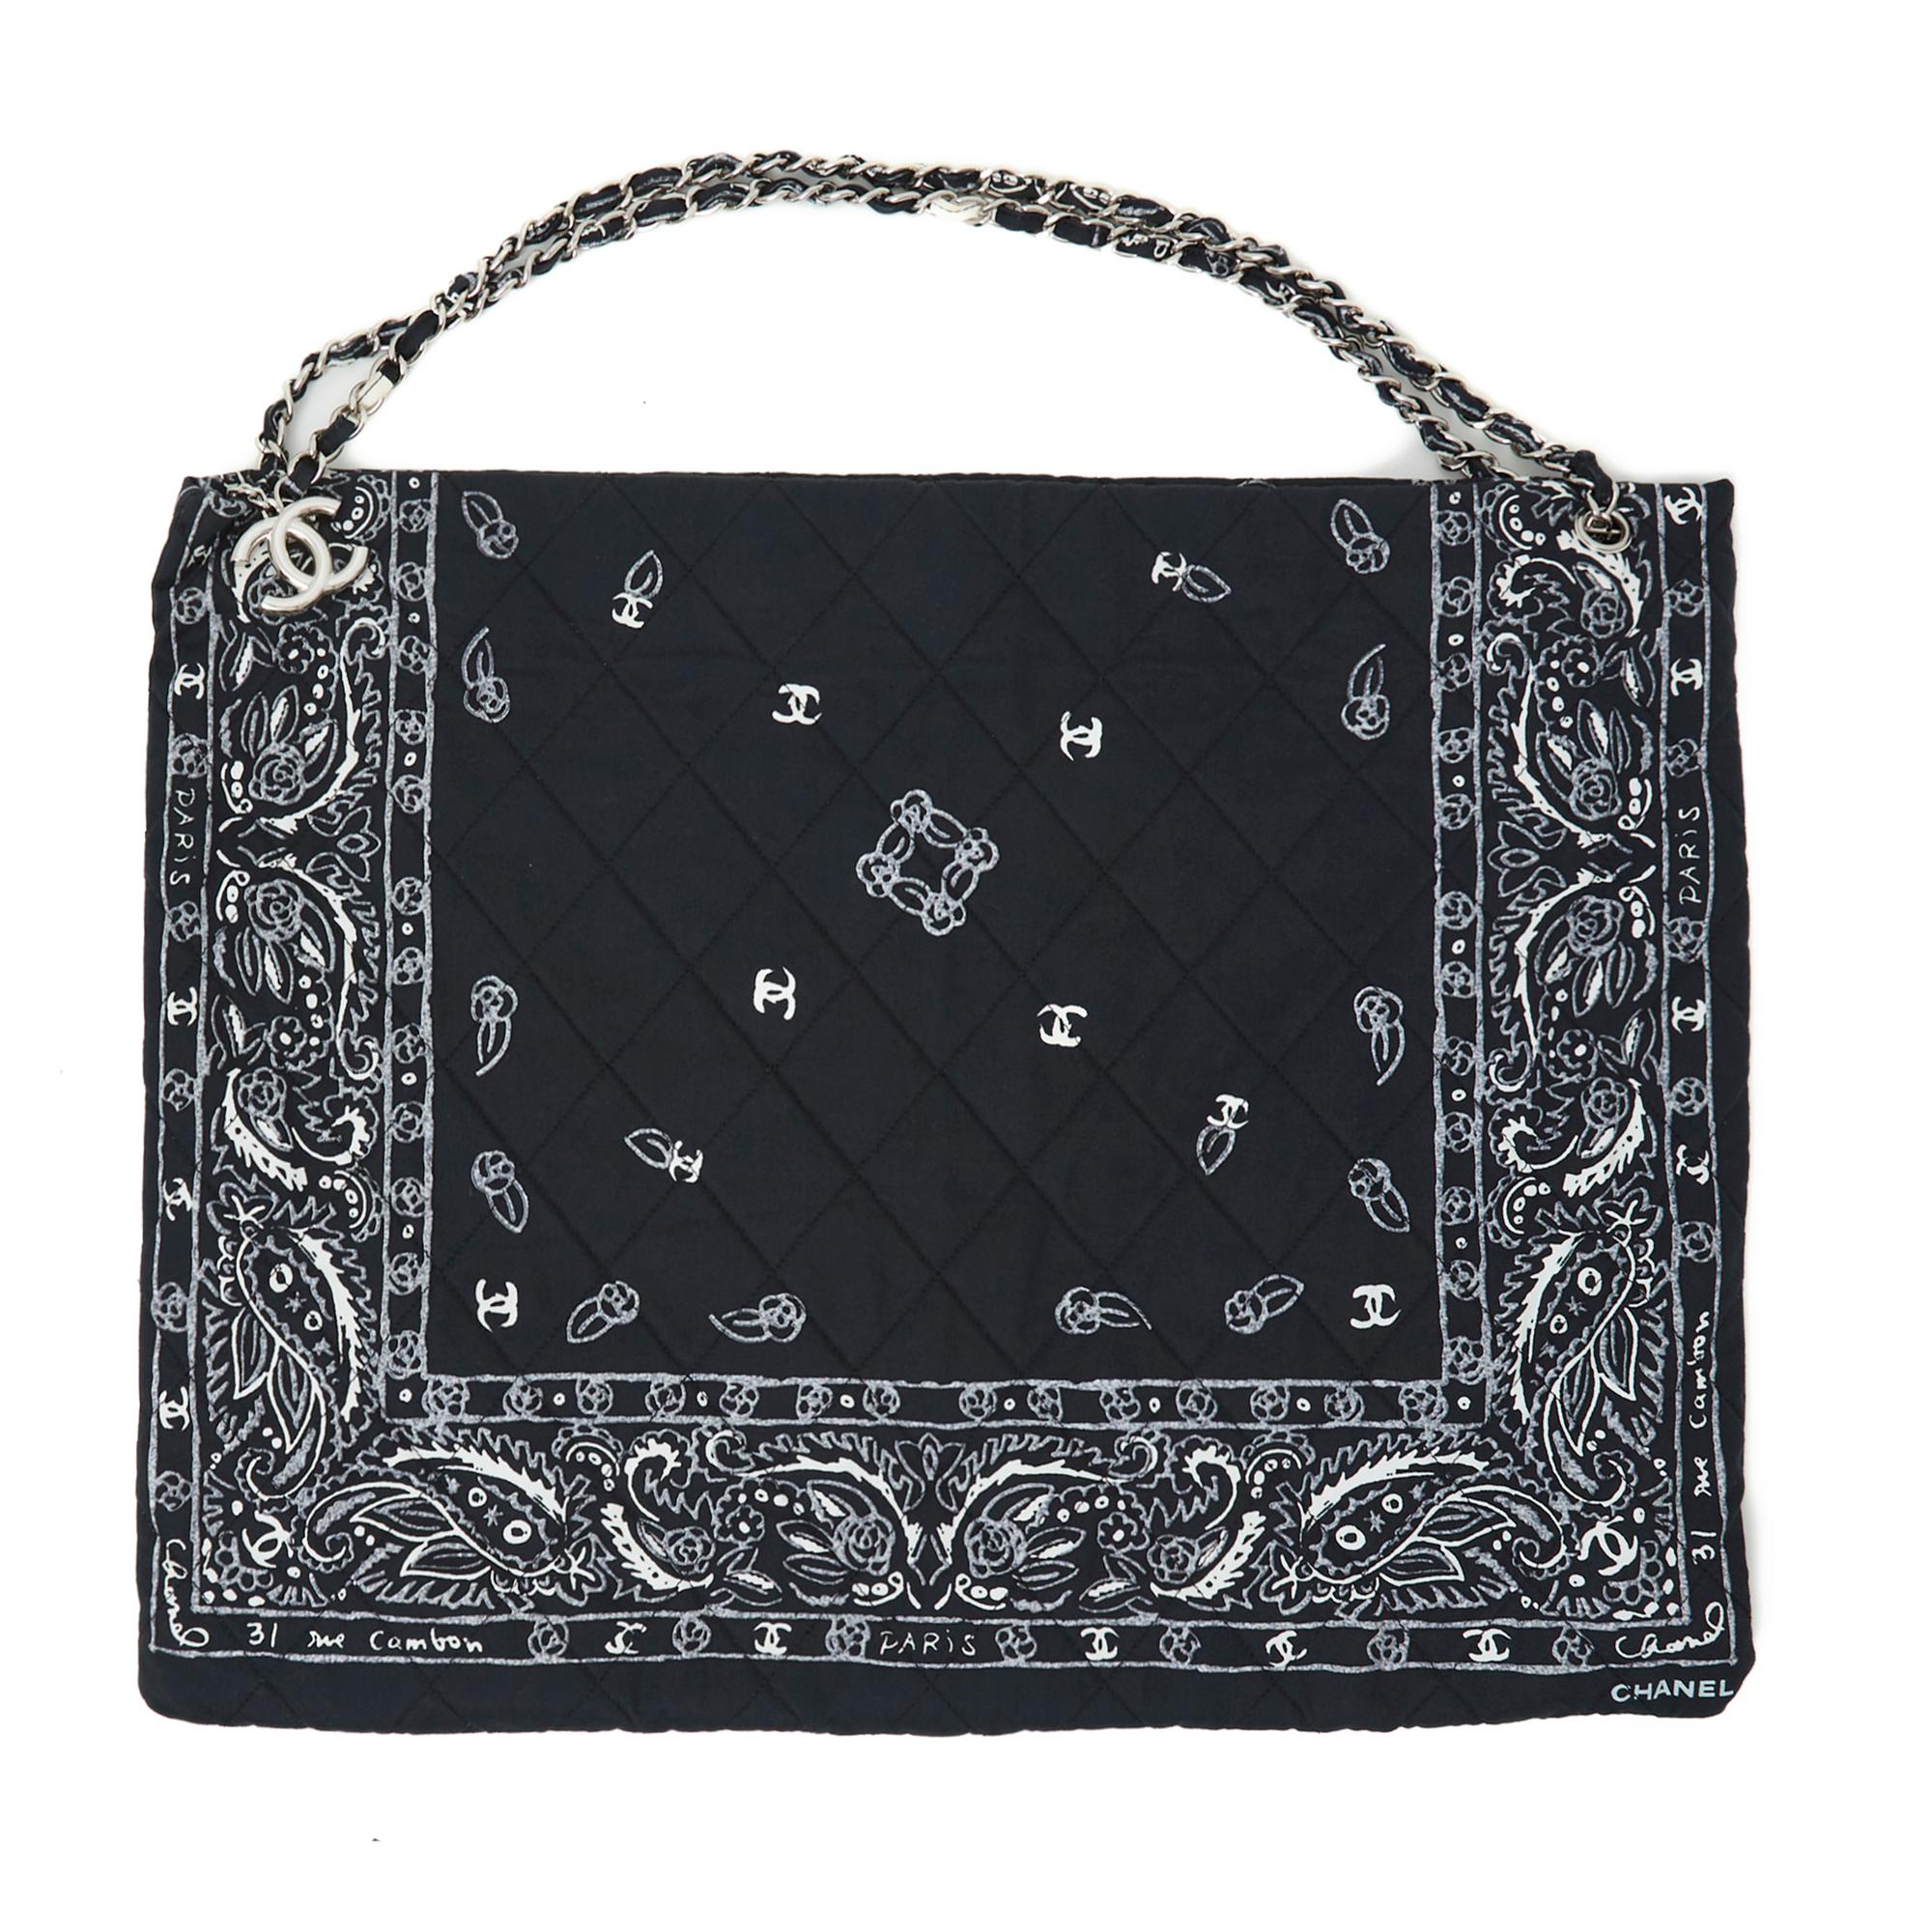 Chanel bag in black quilted canvas, Chanel-style Bandana printed pattern with CC, house address around the edge, logo, interior lined in black canvas with a very large zipped pocket and a black leather key link equipped with a carabiner, the whole